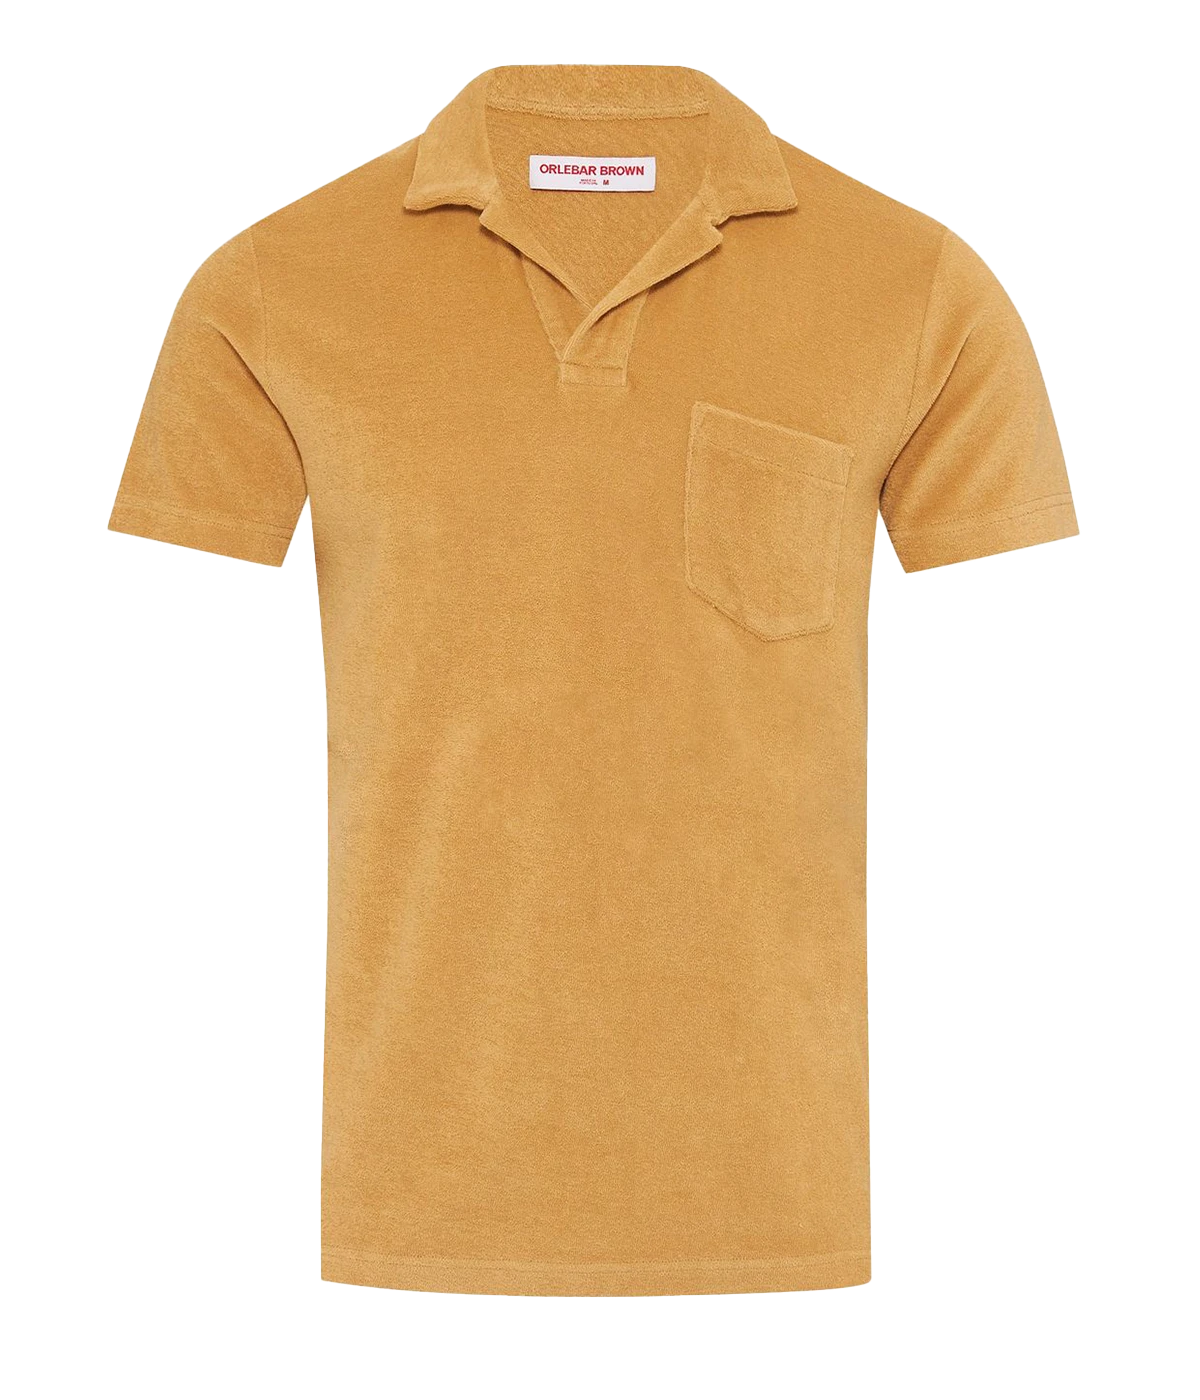 Terry Towling Polo in Biscuit